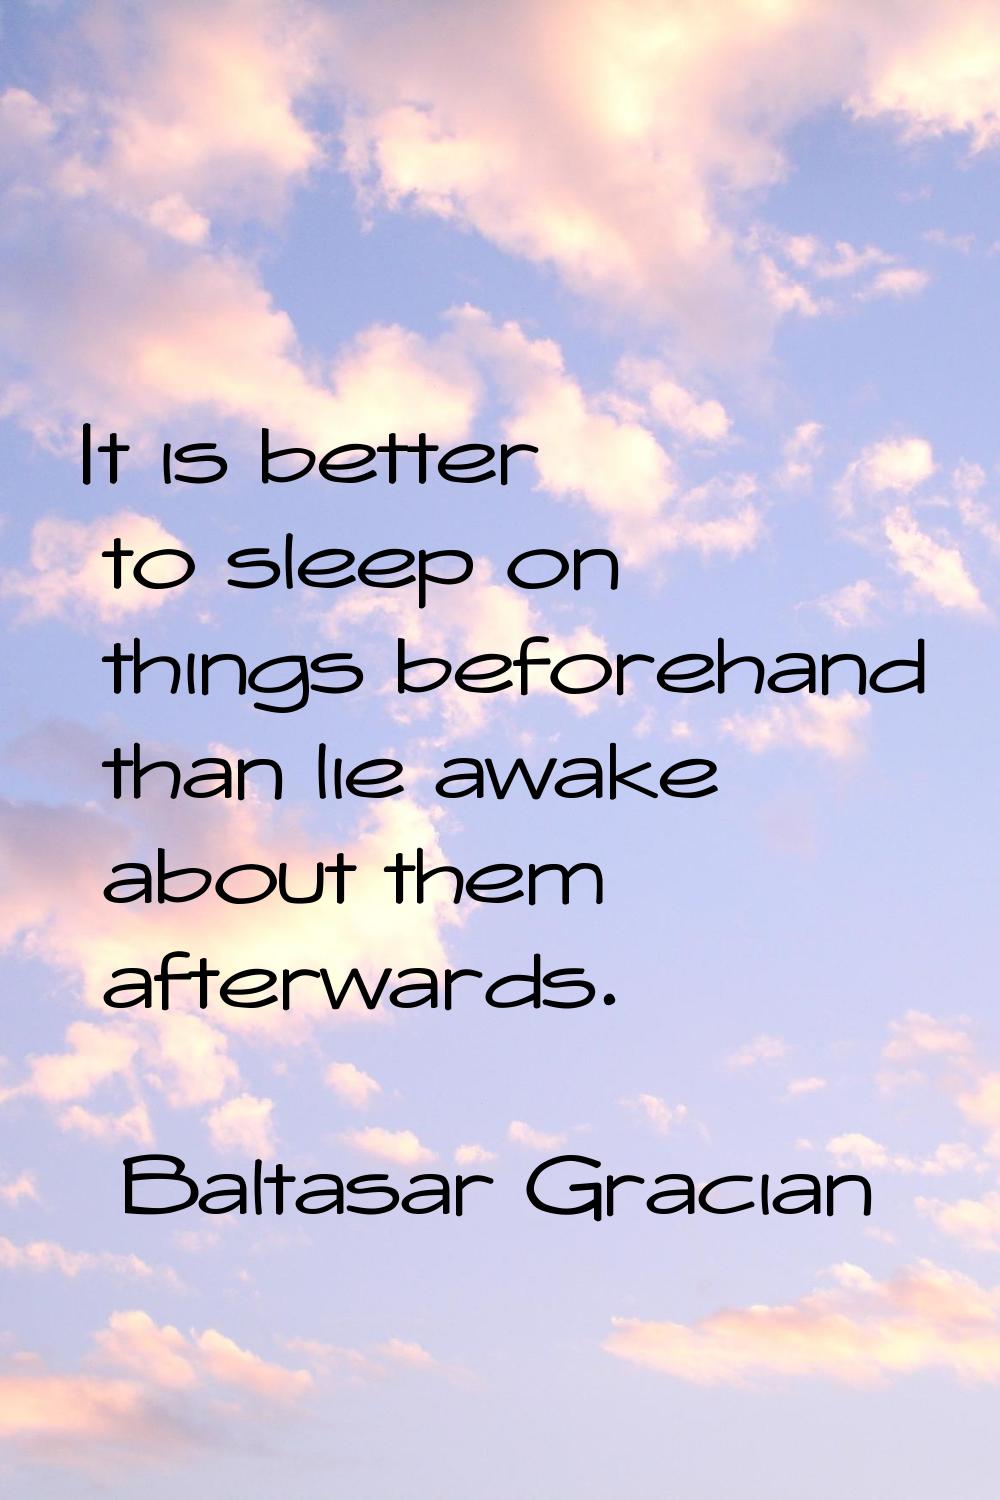 It is better to sleep on things beforehand than lie awake about them afterwards.